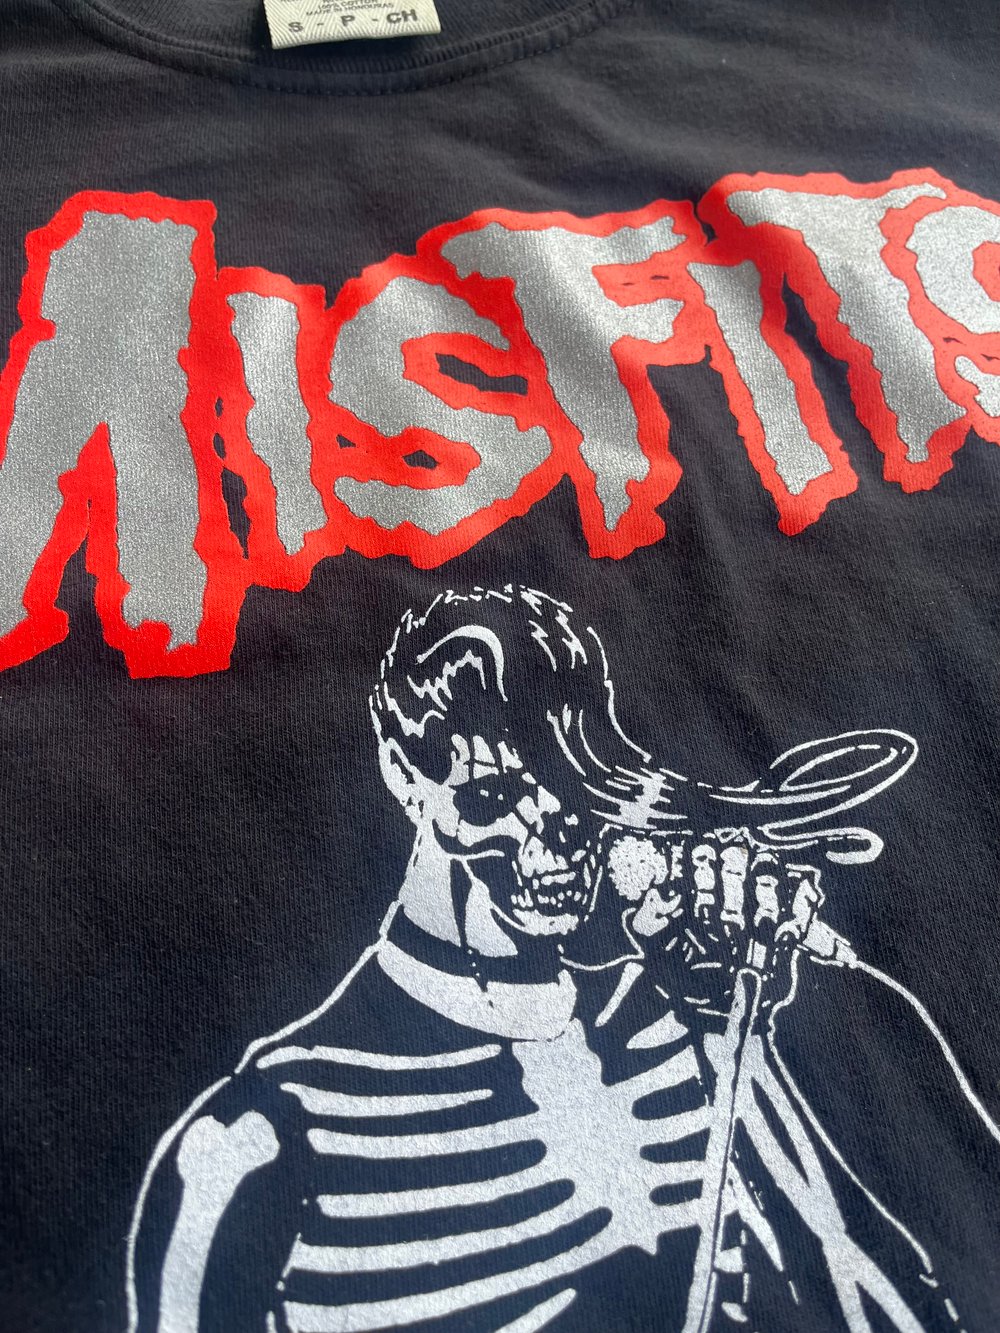 MISFITS 'Legacy Of Brutality' T-Whirt